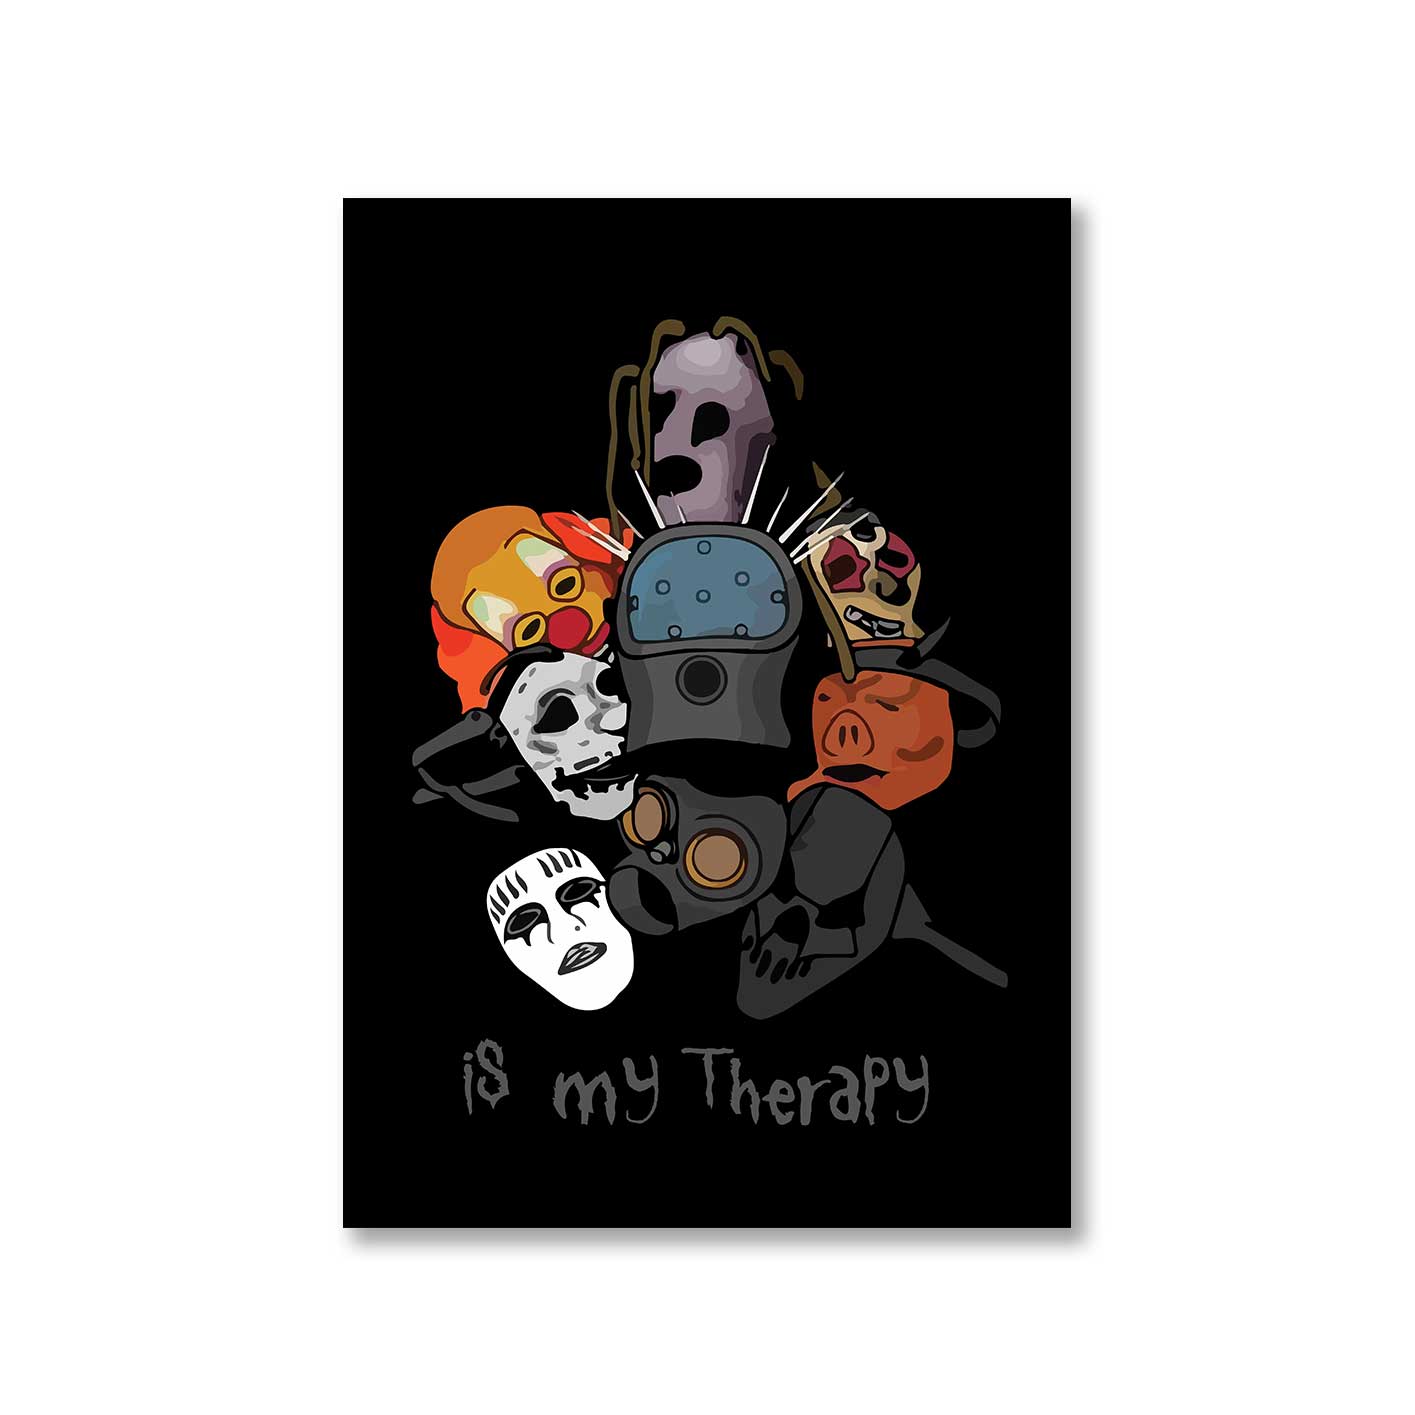 slipknot my therapy poster wall art buy online united states of america usa the banyan tee tbt a4